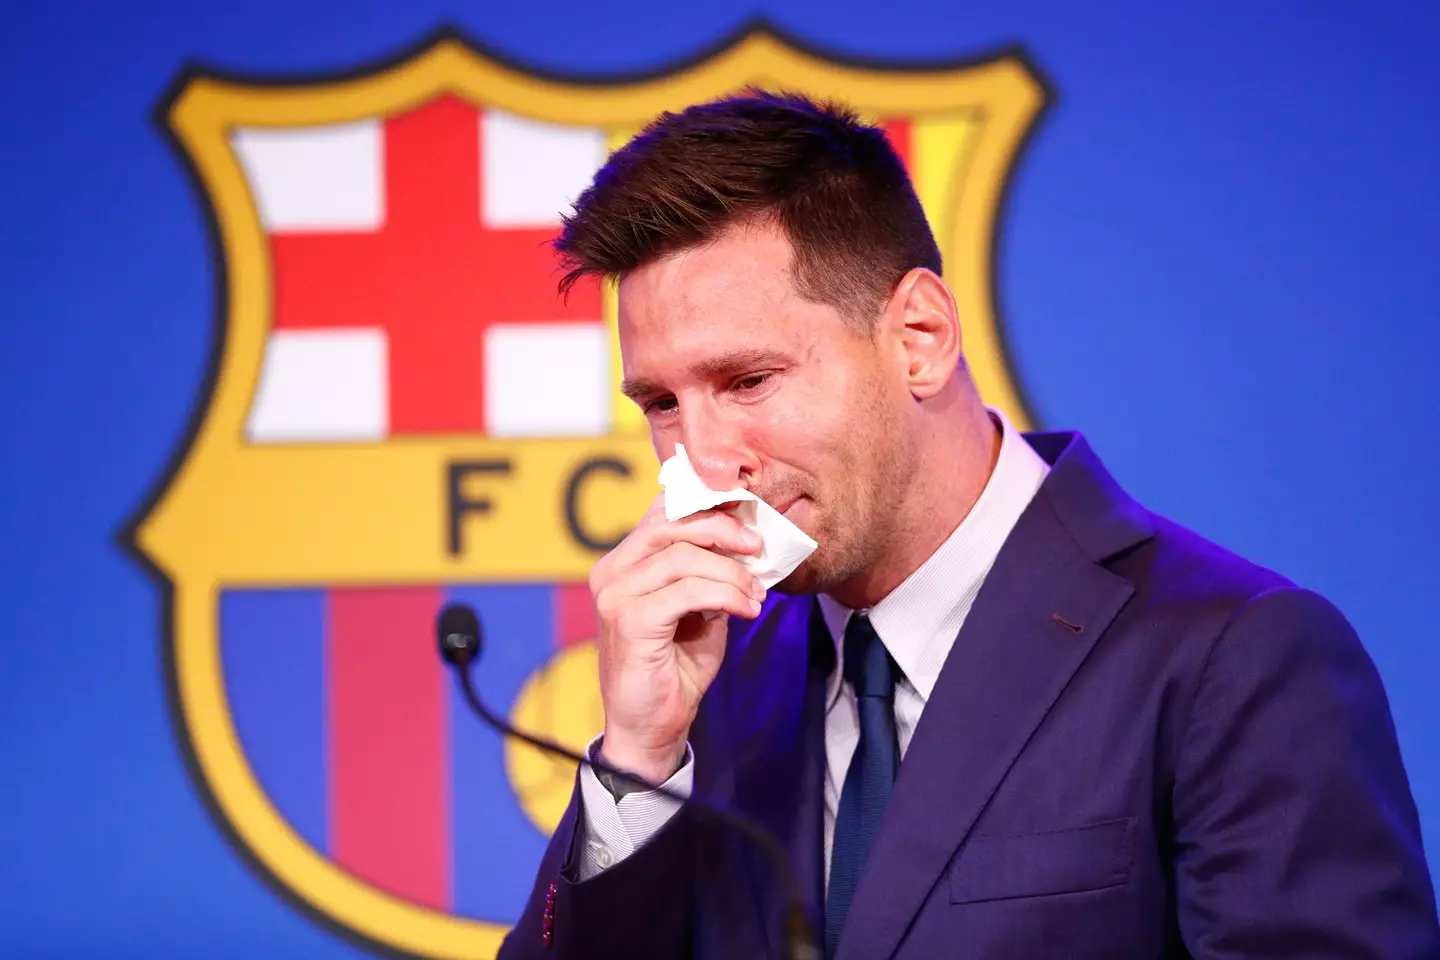 Messi spoke about his tearful departure from Barcelona (Getty)